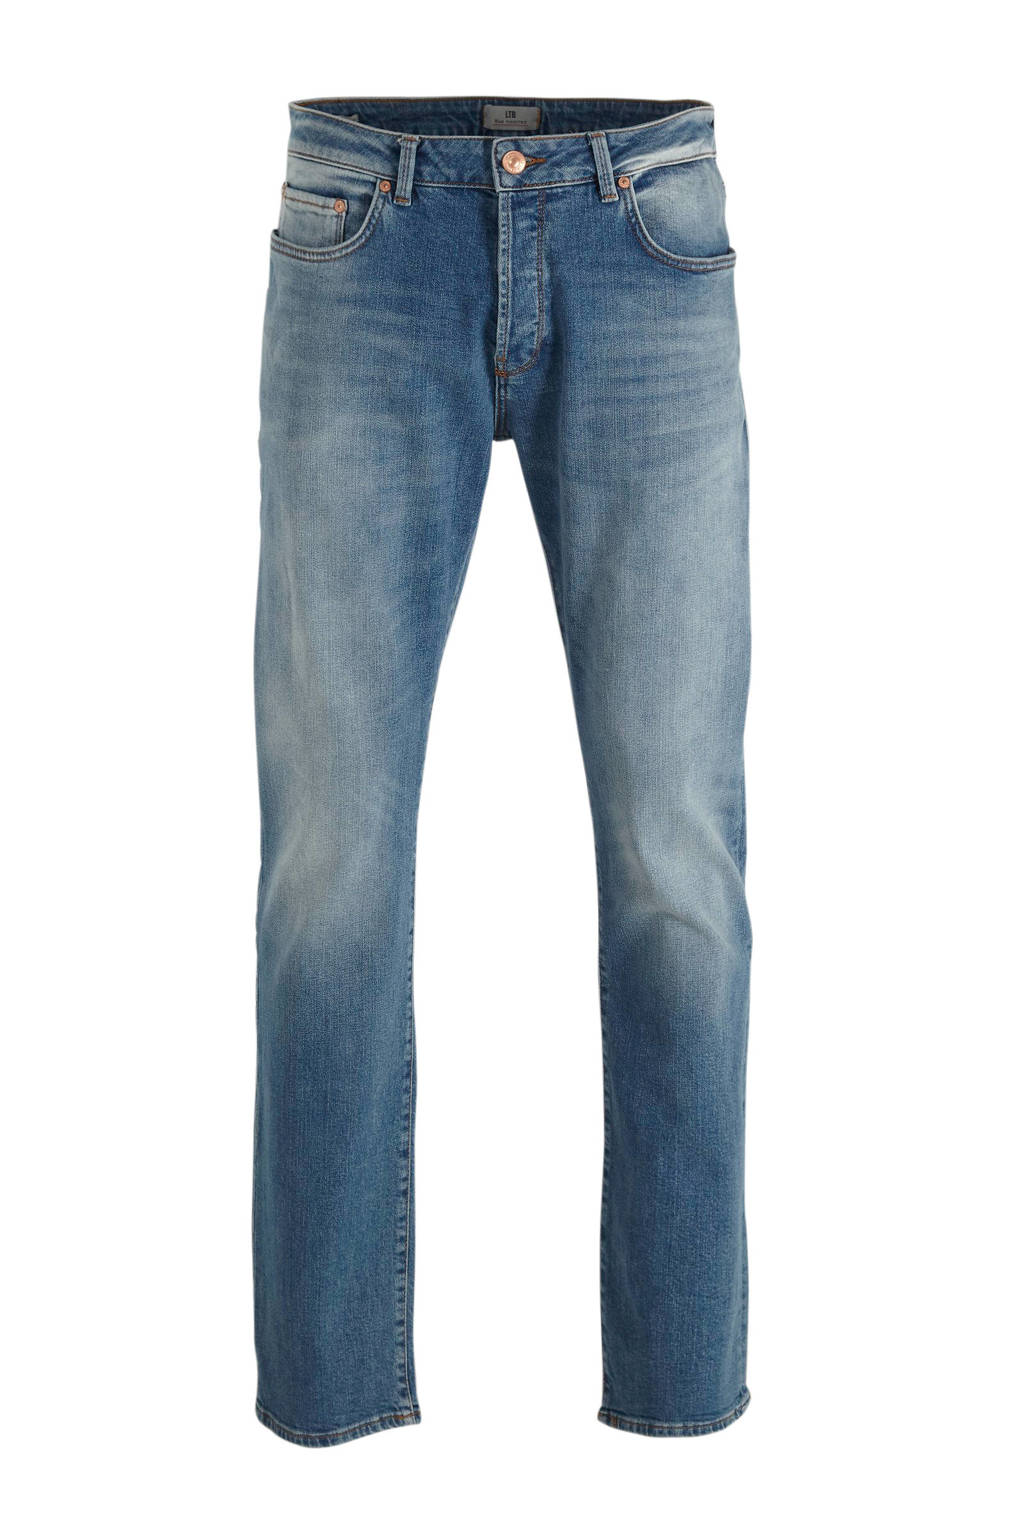 LTB straight fit jeans hollywood luther wash, Luther wash